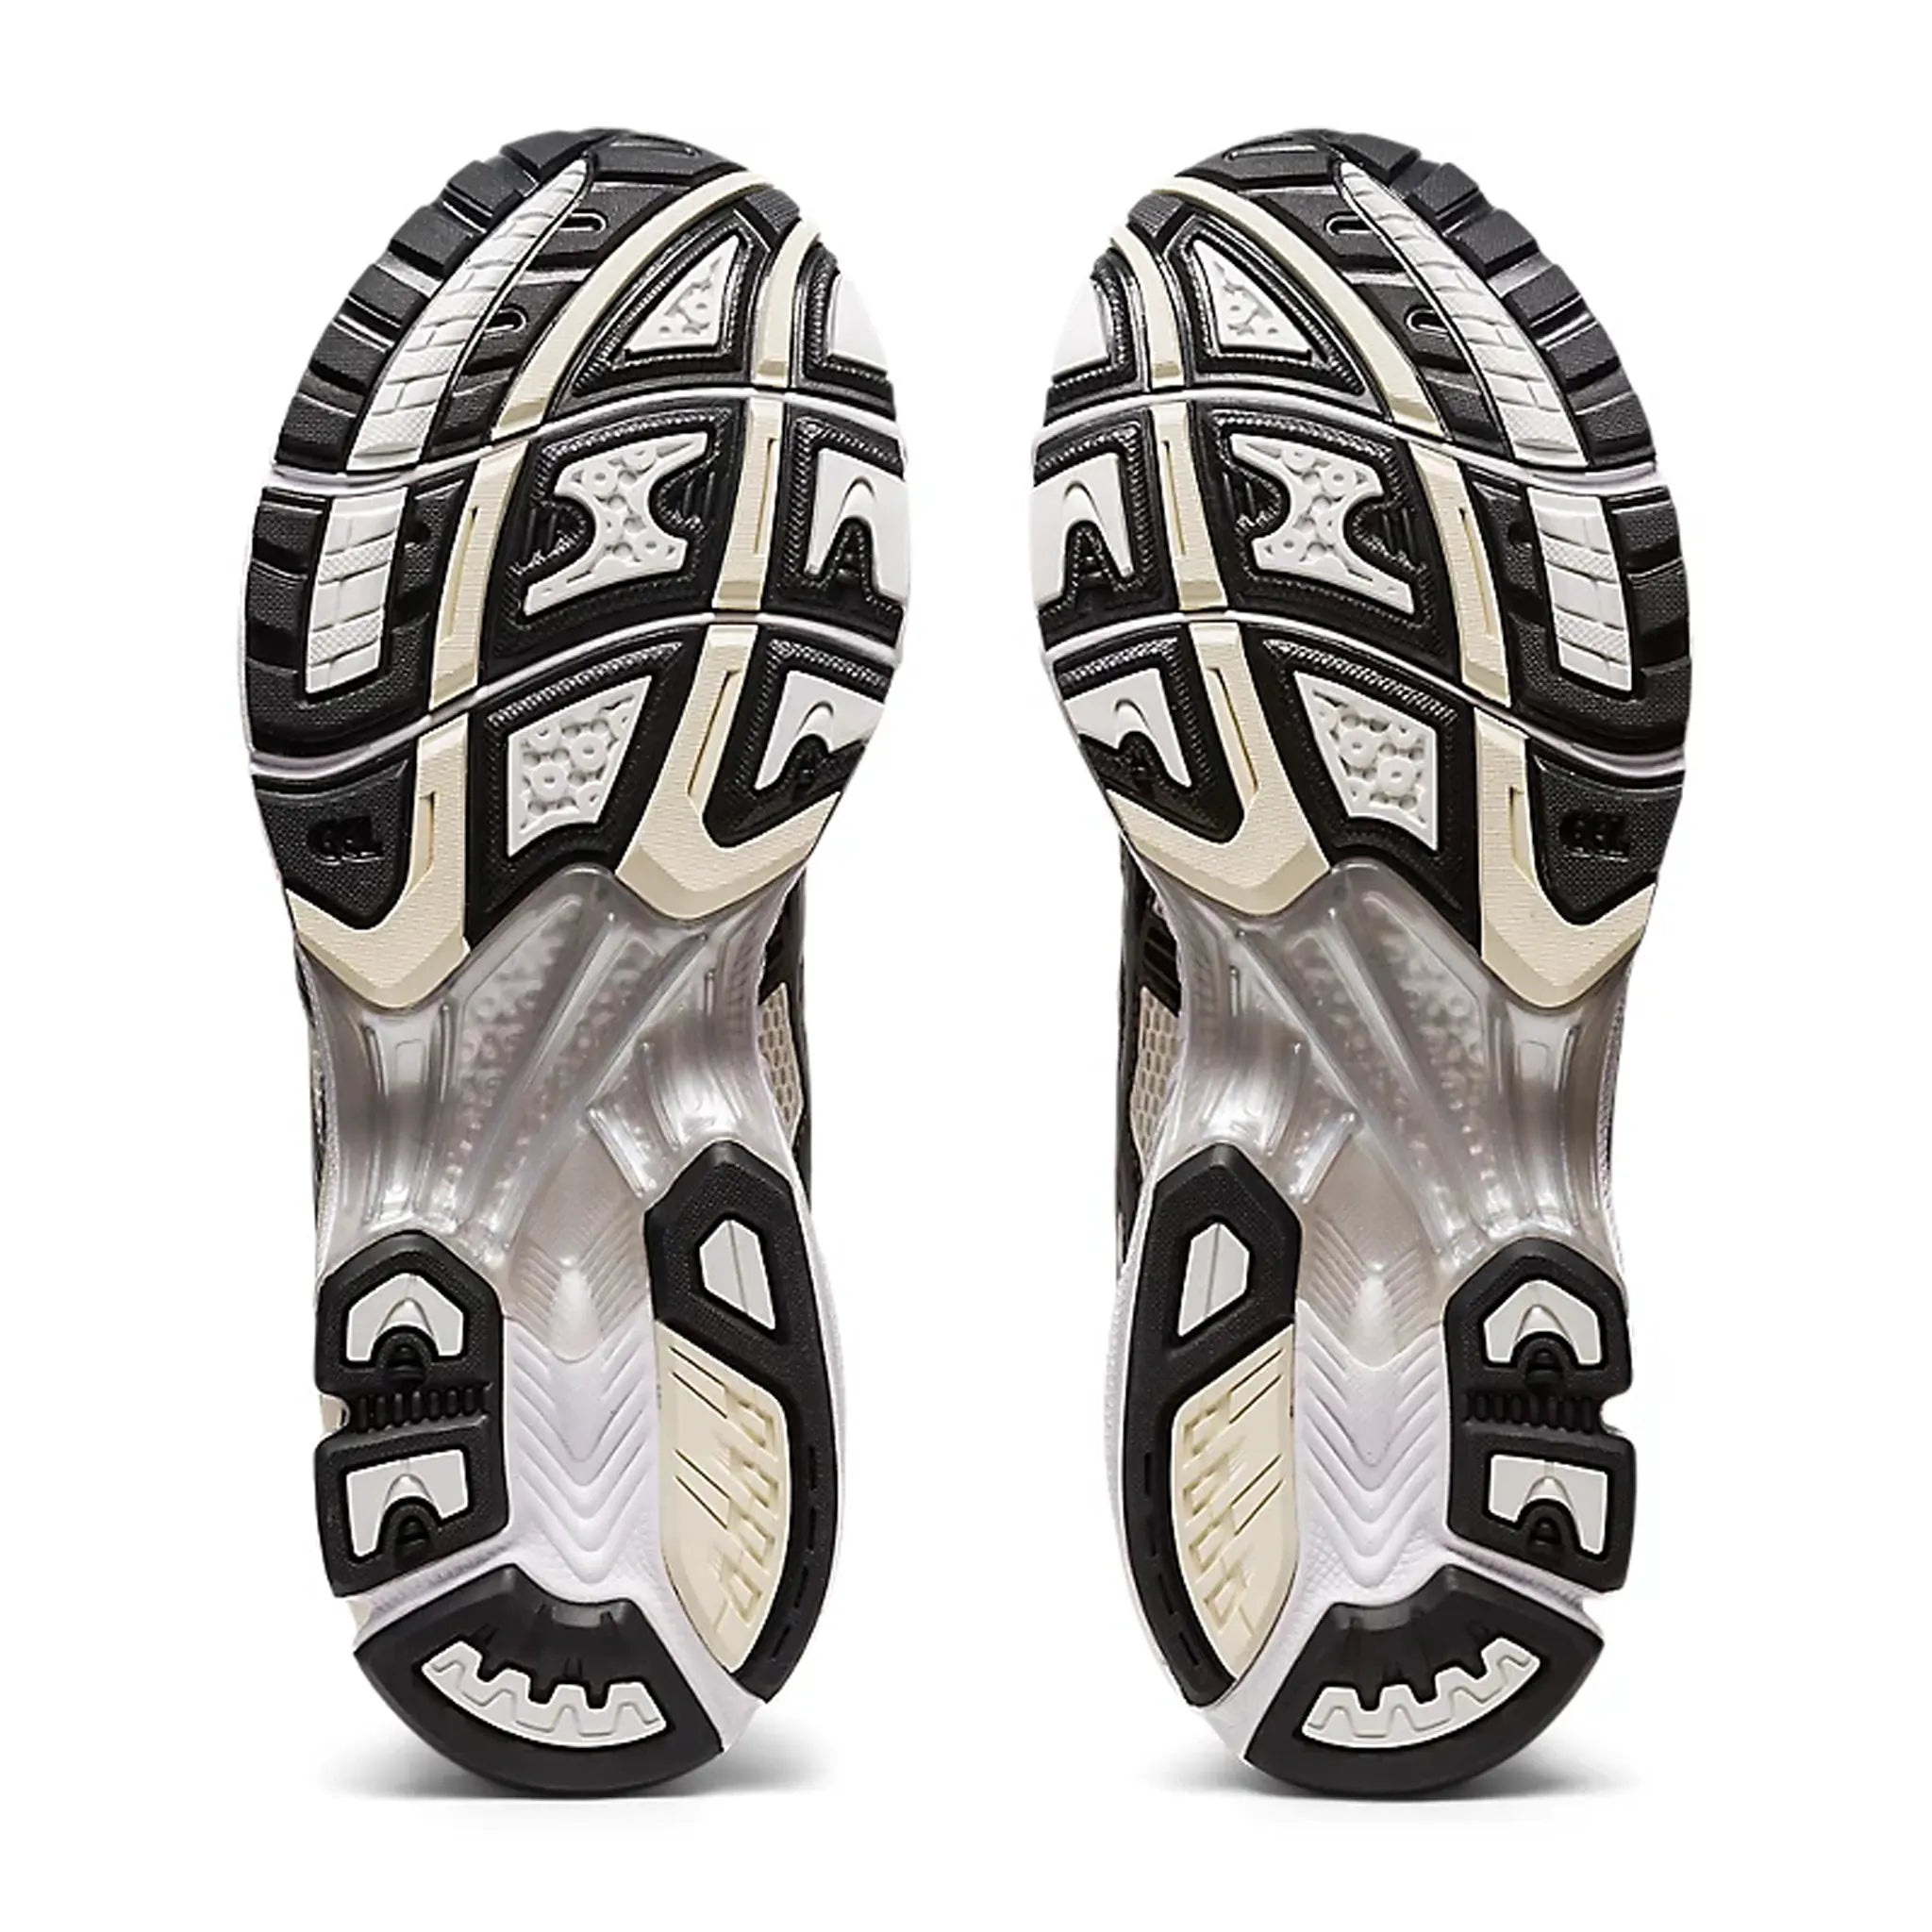 Sole view of Asics Gel-Kayano 14 Silver Cream Black (W) 1201A019-108